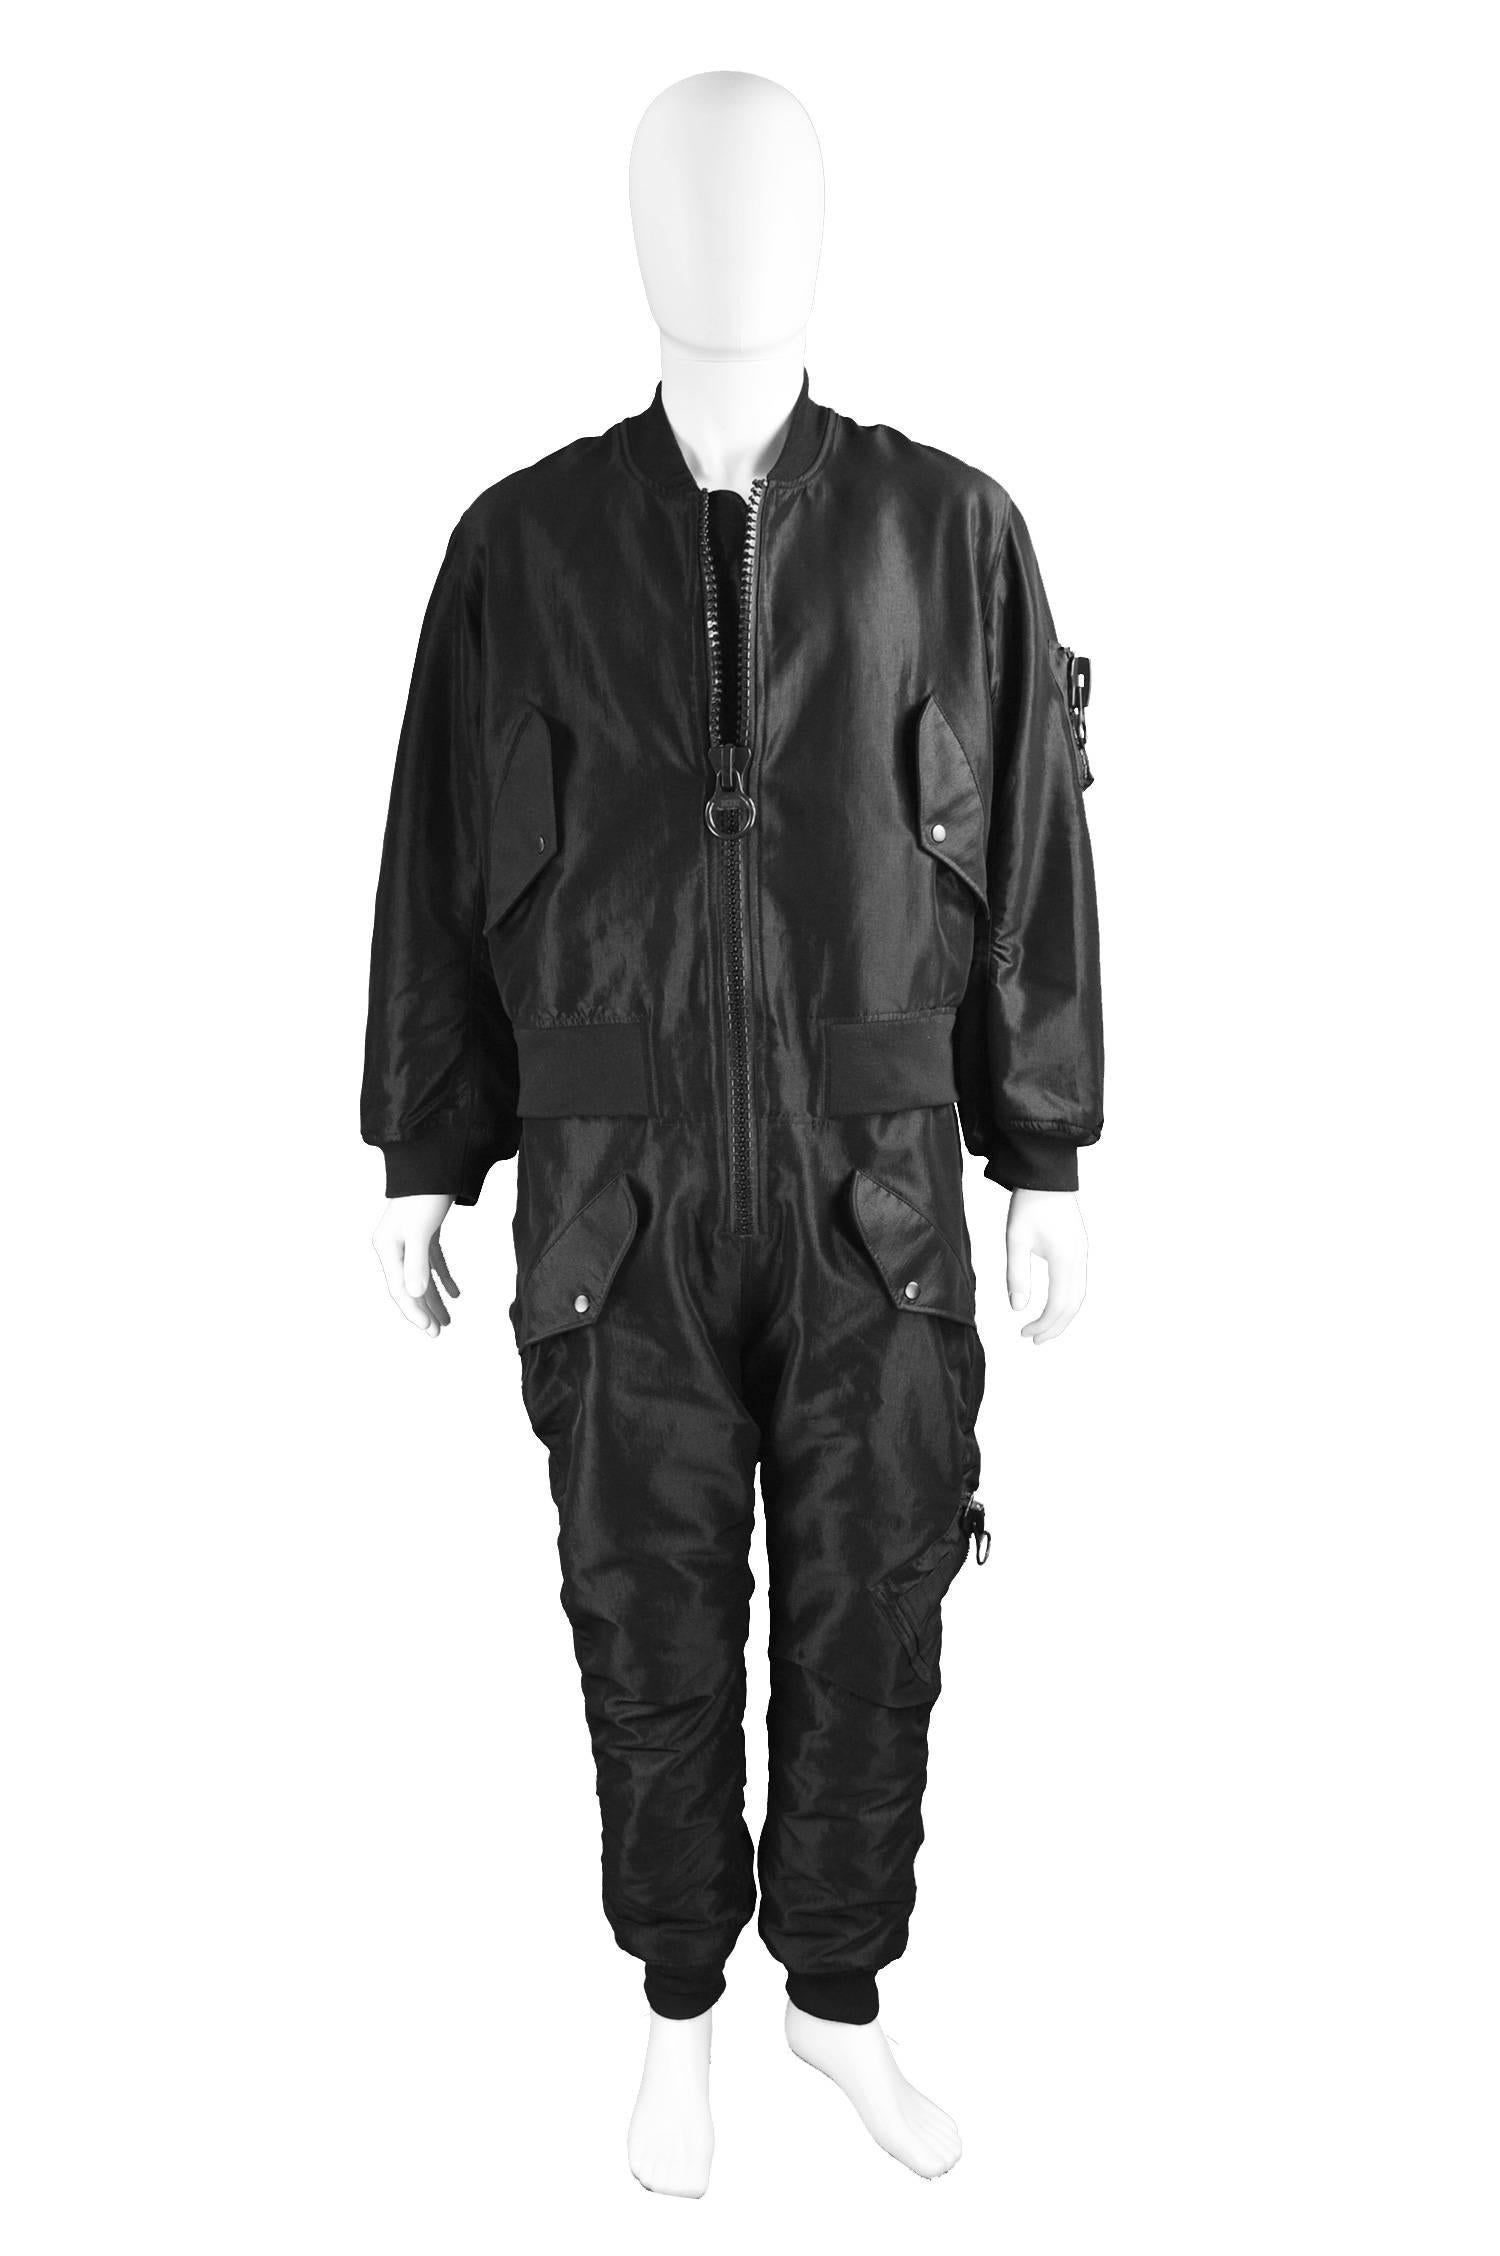 KTZ Rare Mens Black Quilted All in One Boiler Suit / Jumpsuit L

Size: Marked Men's L but could fit XL due to loose fit
Chest - up to 48” / 122cm up to (has a loose fit on top like a bomber jacket)
Waist - up to 40” / 101cm
Inside Leg - 29” /